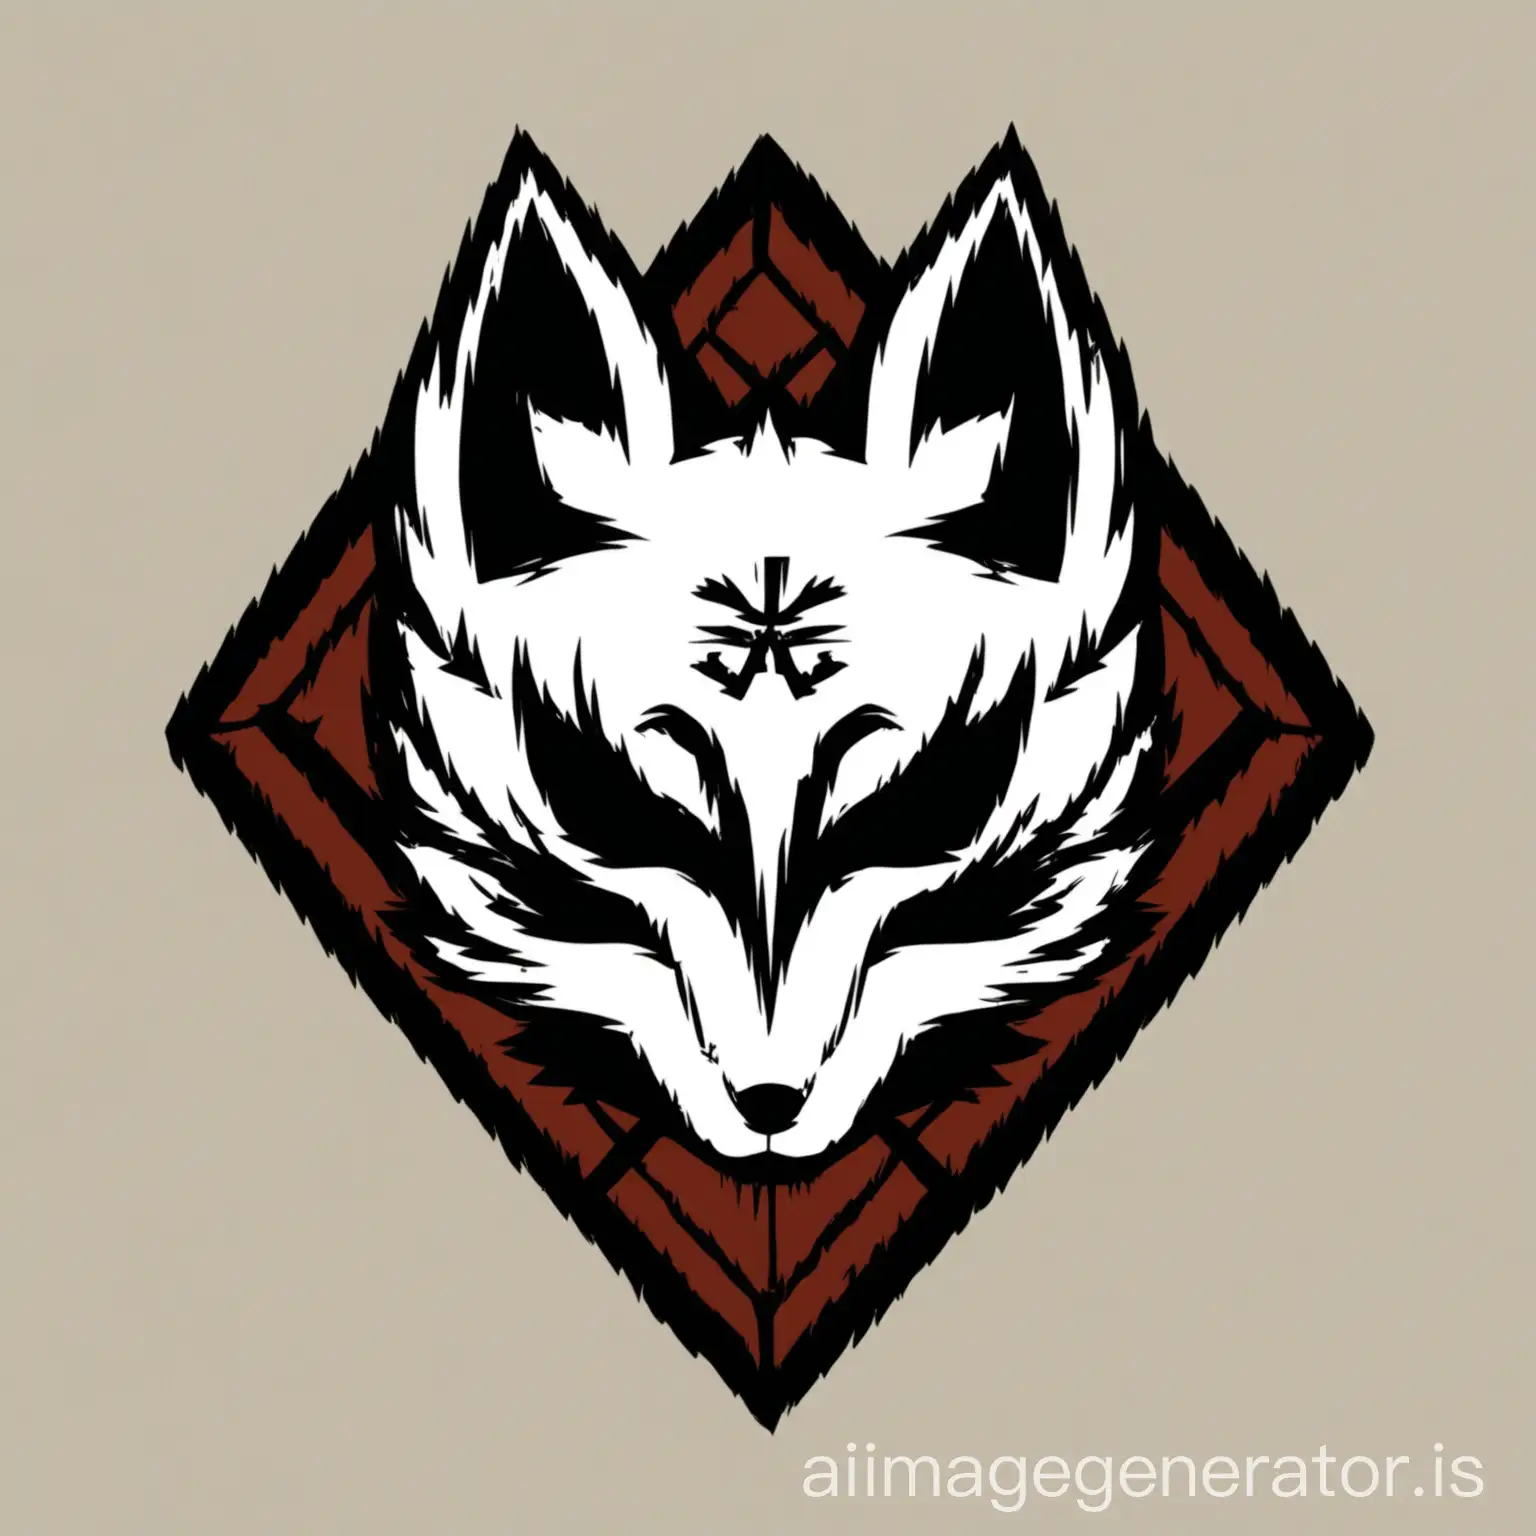 Generate a logo for me, have the word 'Pejore' in it, placed prominently in the lower left corner of the main body which is a fox head, shaped like a white Japanese ninja face. The fox head should be side-facing and have a scar over one eye.